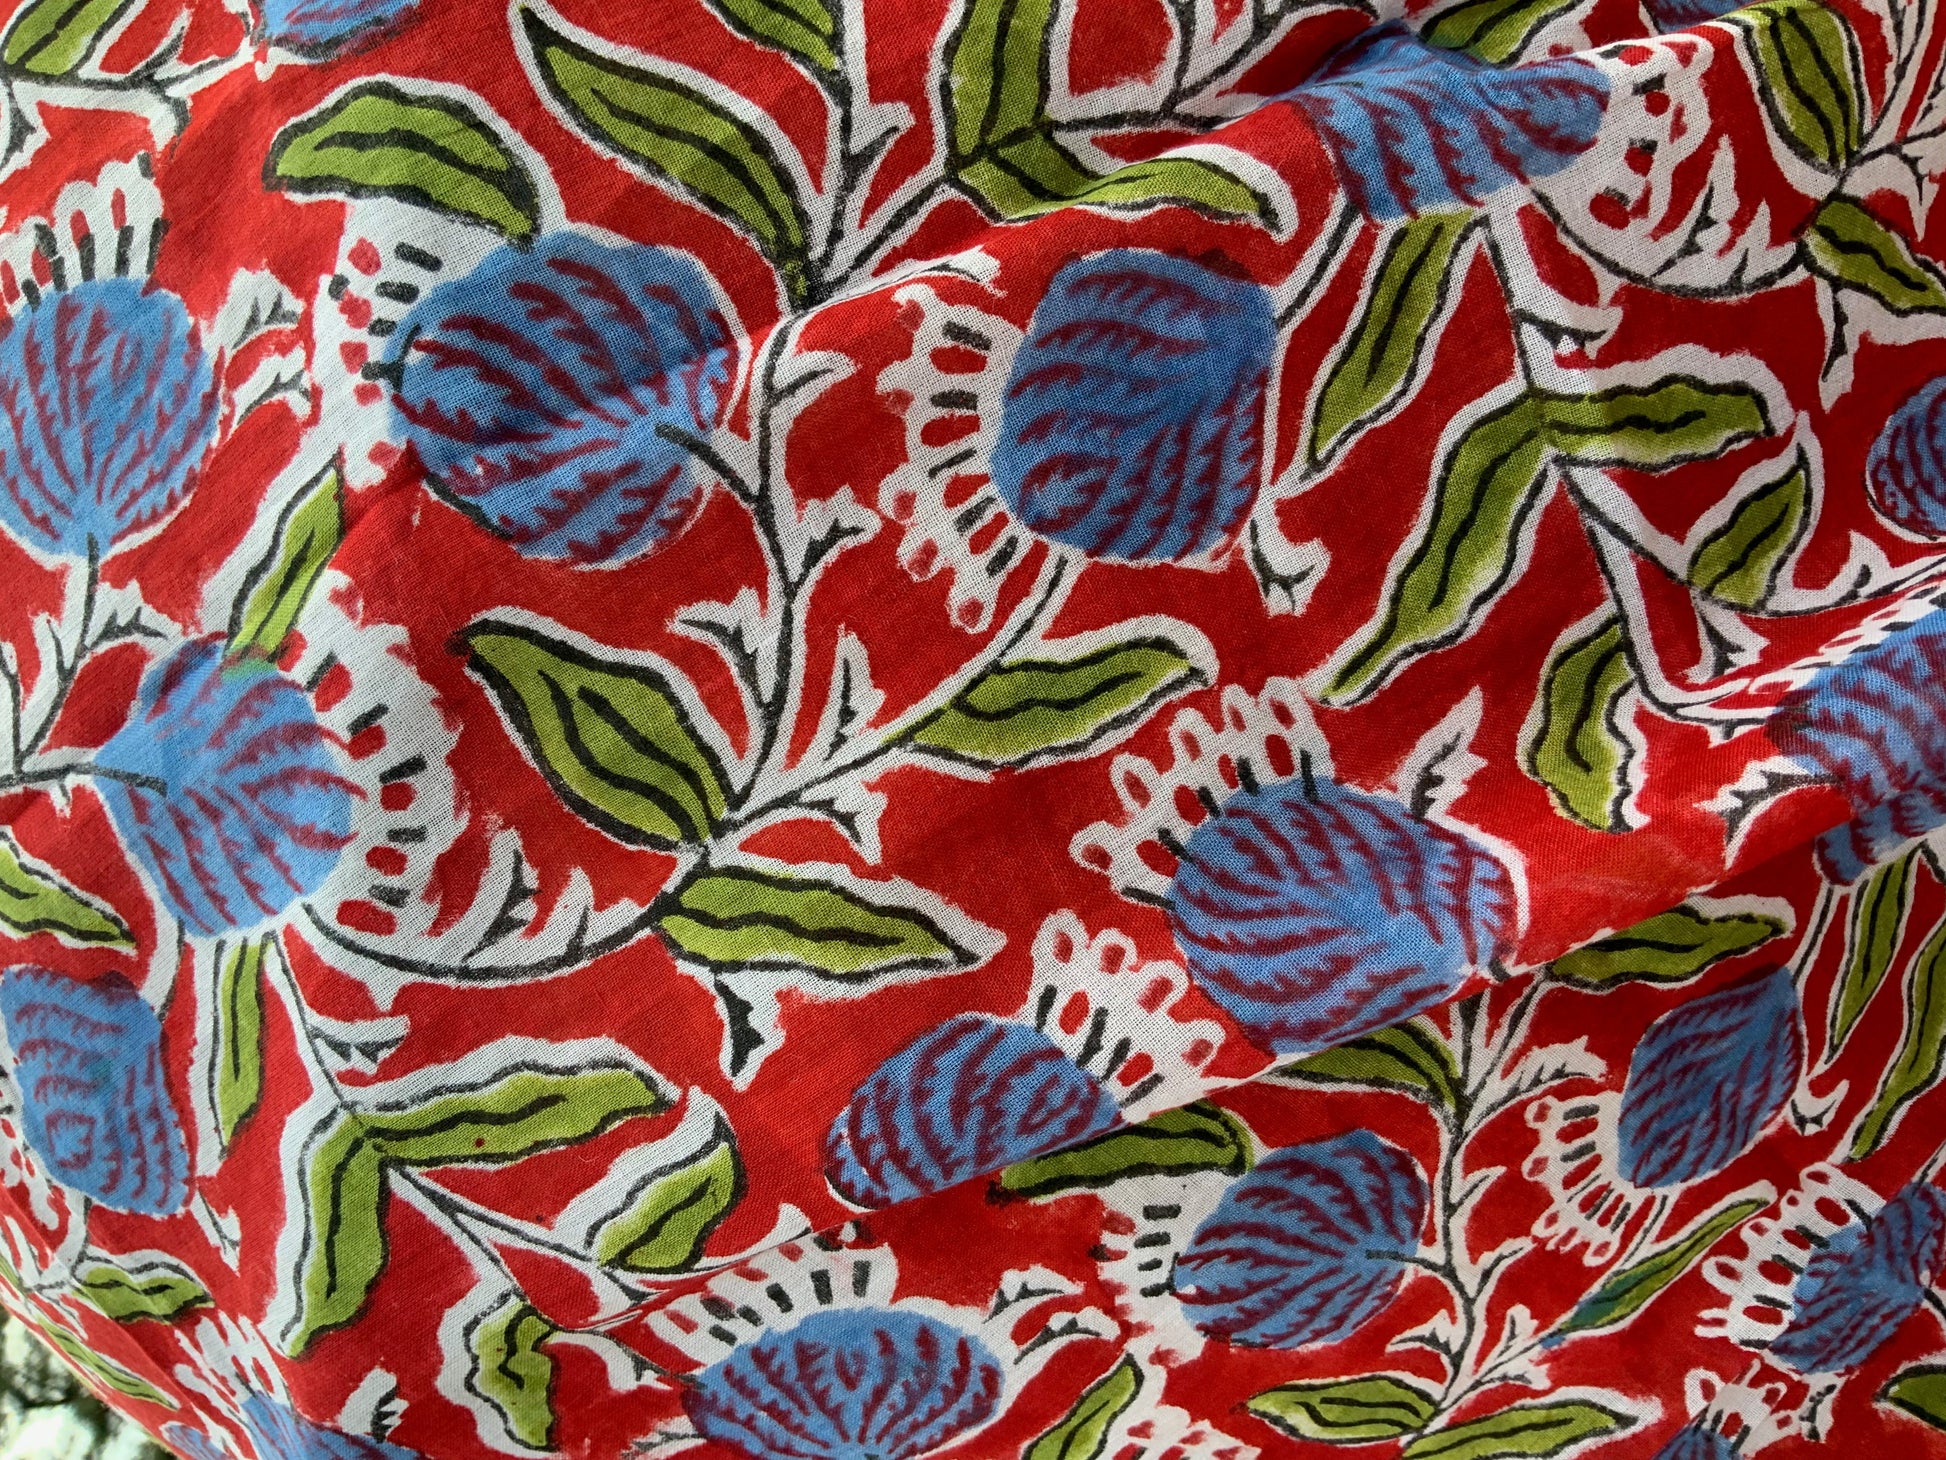 Hand-block Printed Cotton Sarong and Scarves in Blue Flowers on Brick Red Background - DharBazaar